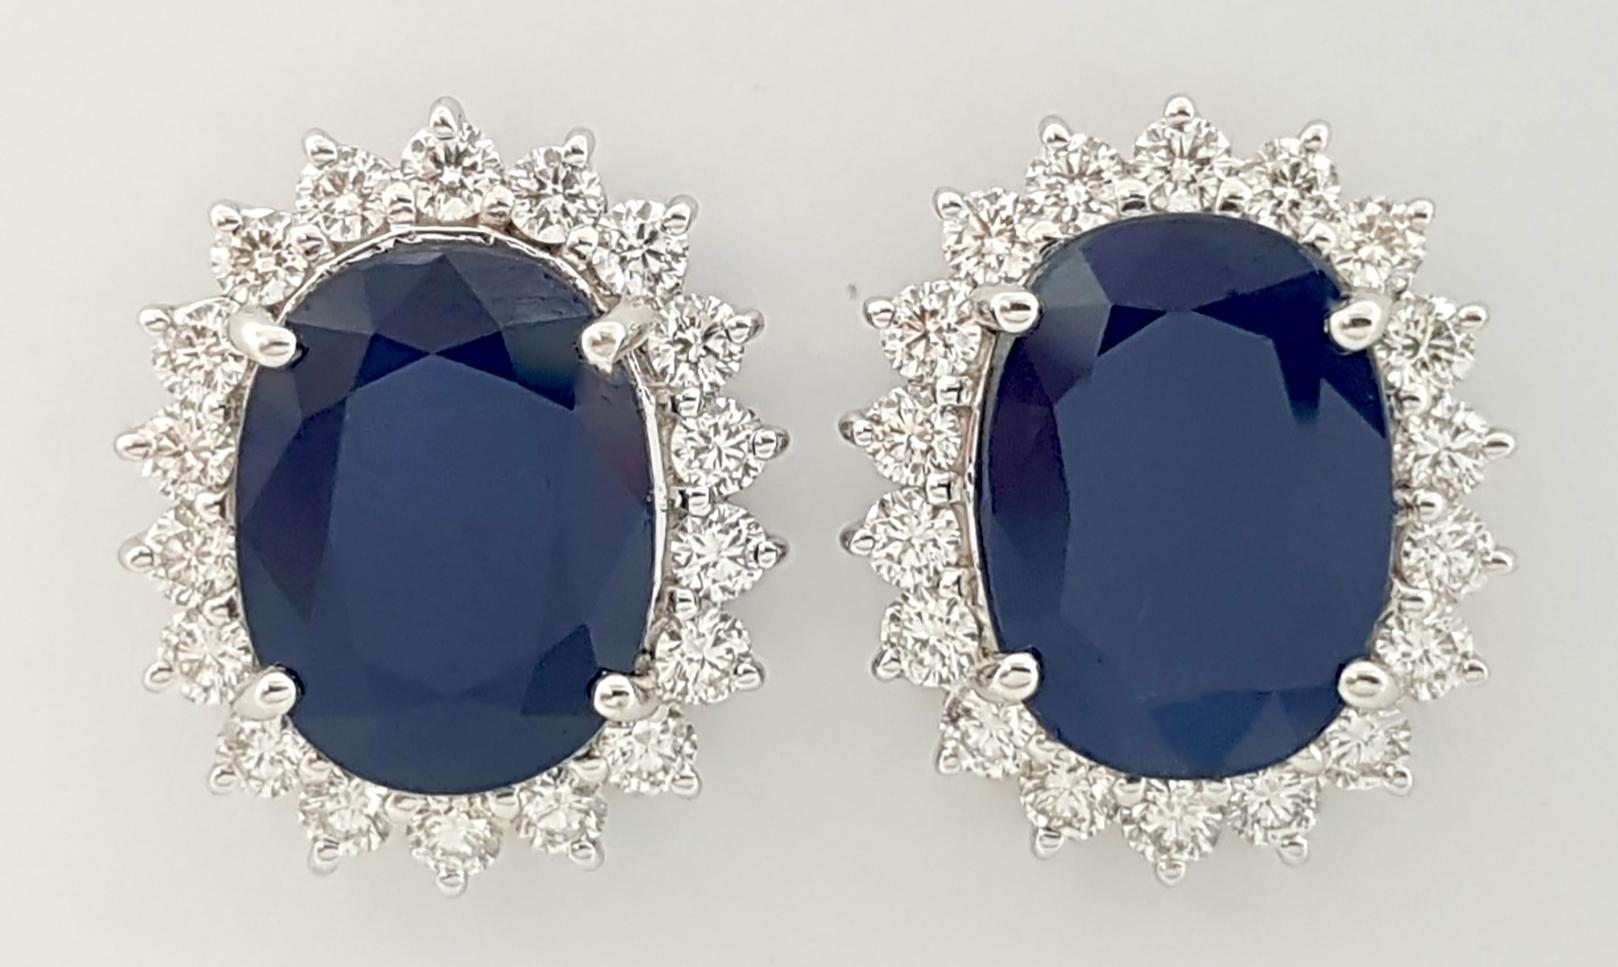 Blue Sapphire 8.45 carats with Diamond 1.43 carats Earrings set in 18K White Gold Settings

Width: 1.4 cm 
Length: 1.8 cm
Total Weight: 11.72 grams

